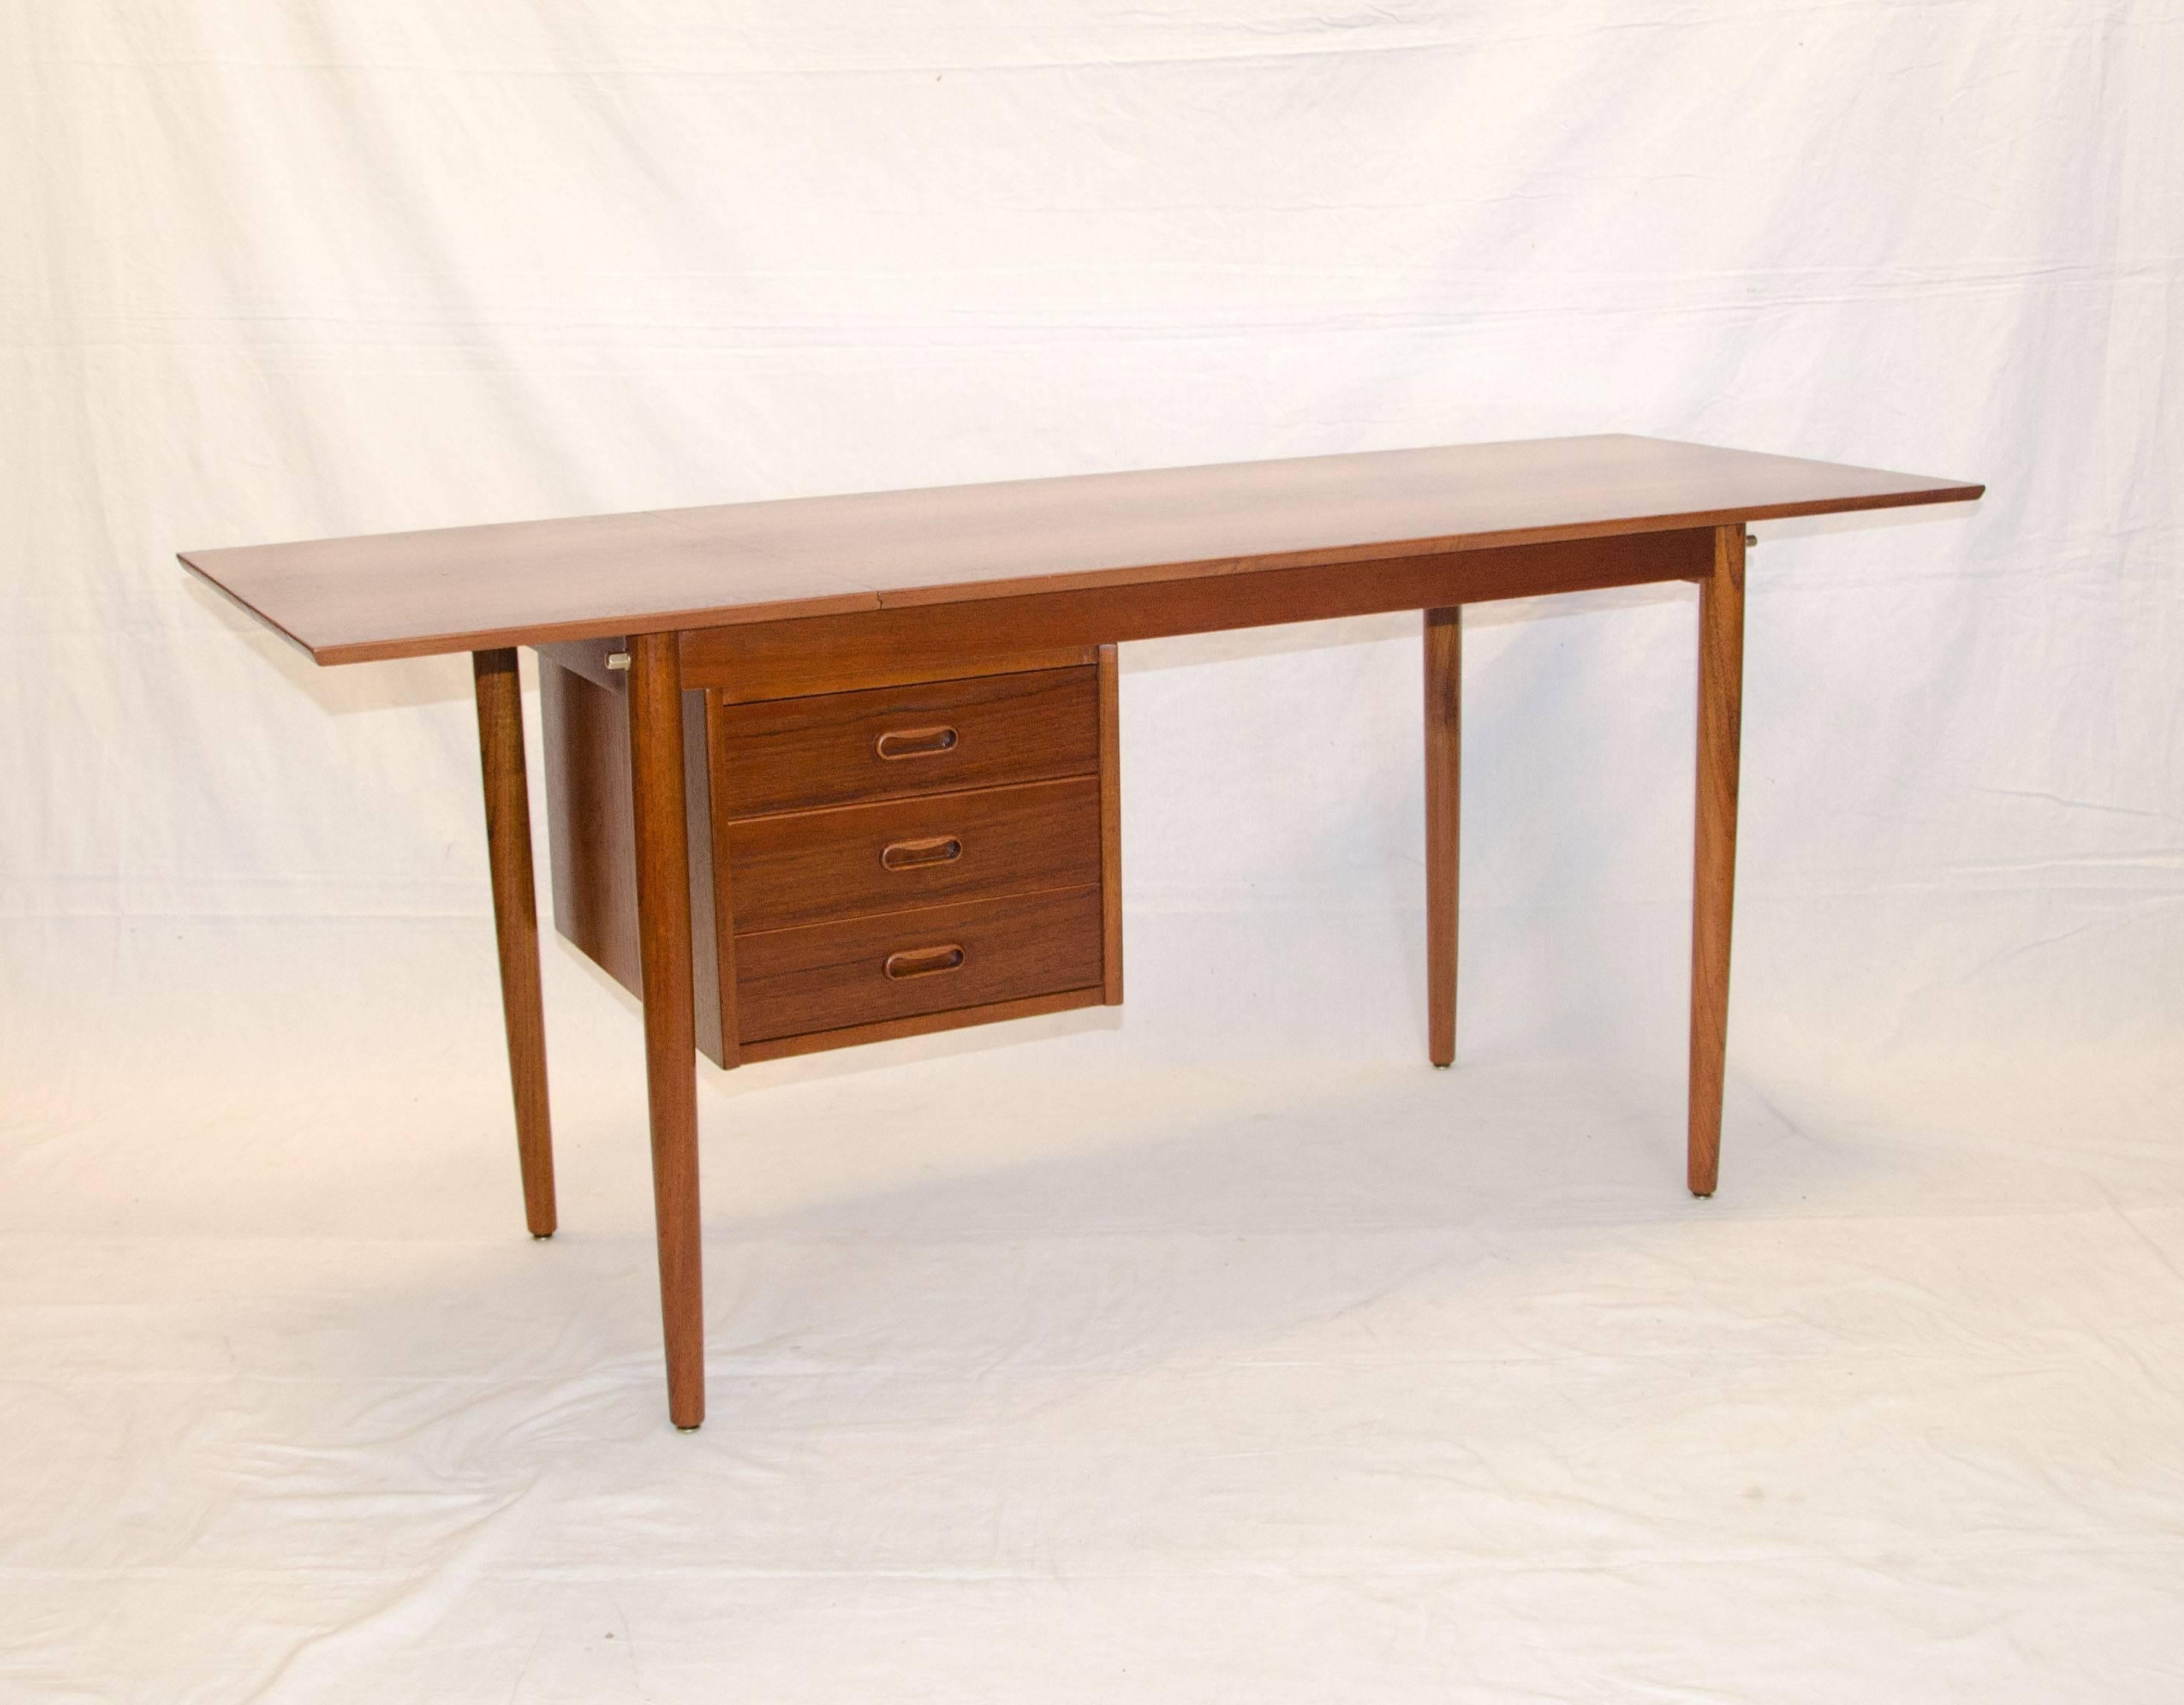 This medium size teak desk has a track under the writing surface that allow the drawers to slide to either side for left or right handed access. The writing surface has a drop leaf section which increases the work space, it functions easily by